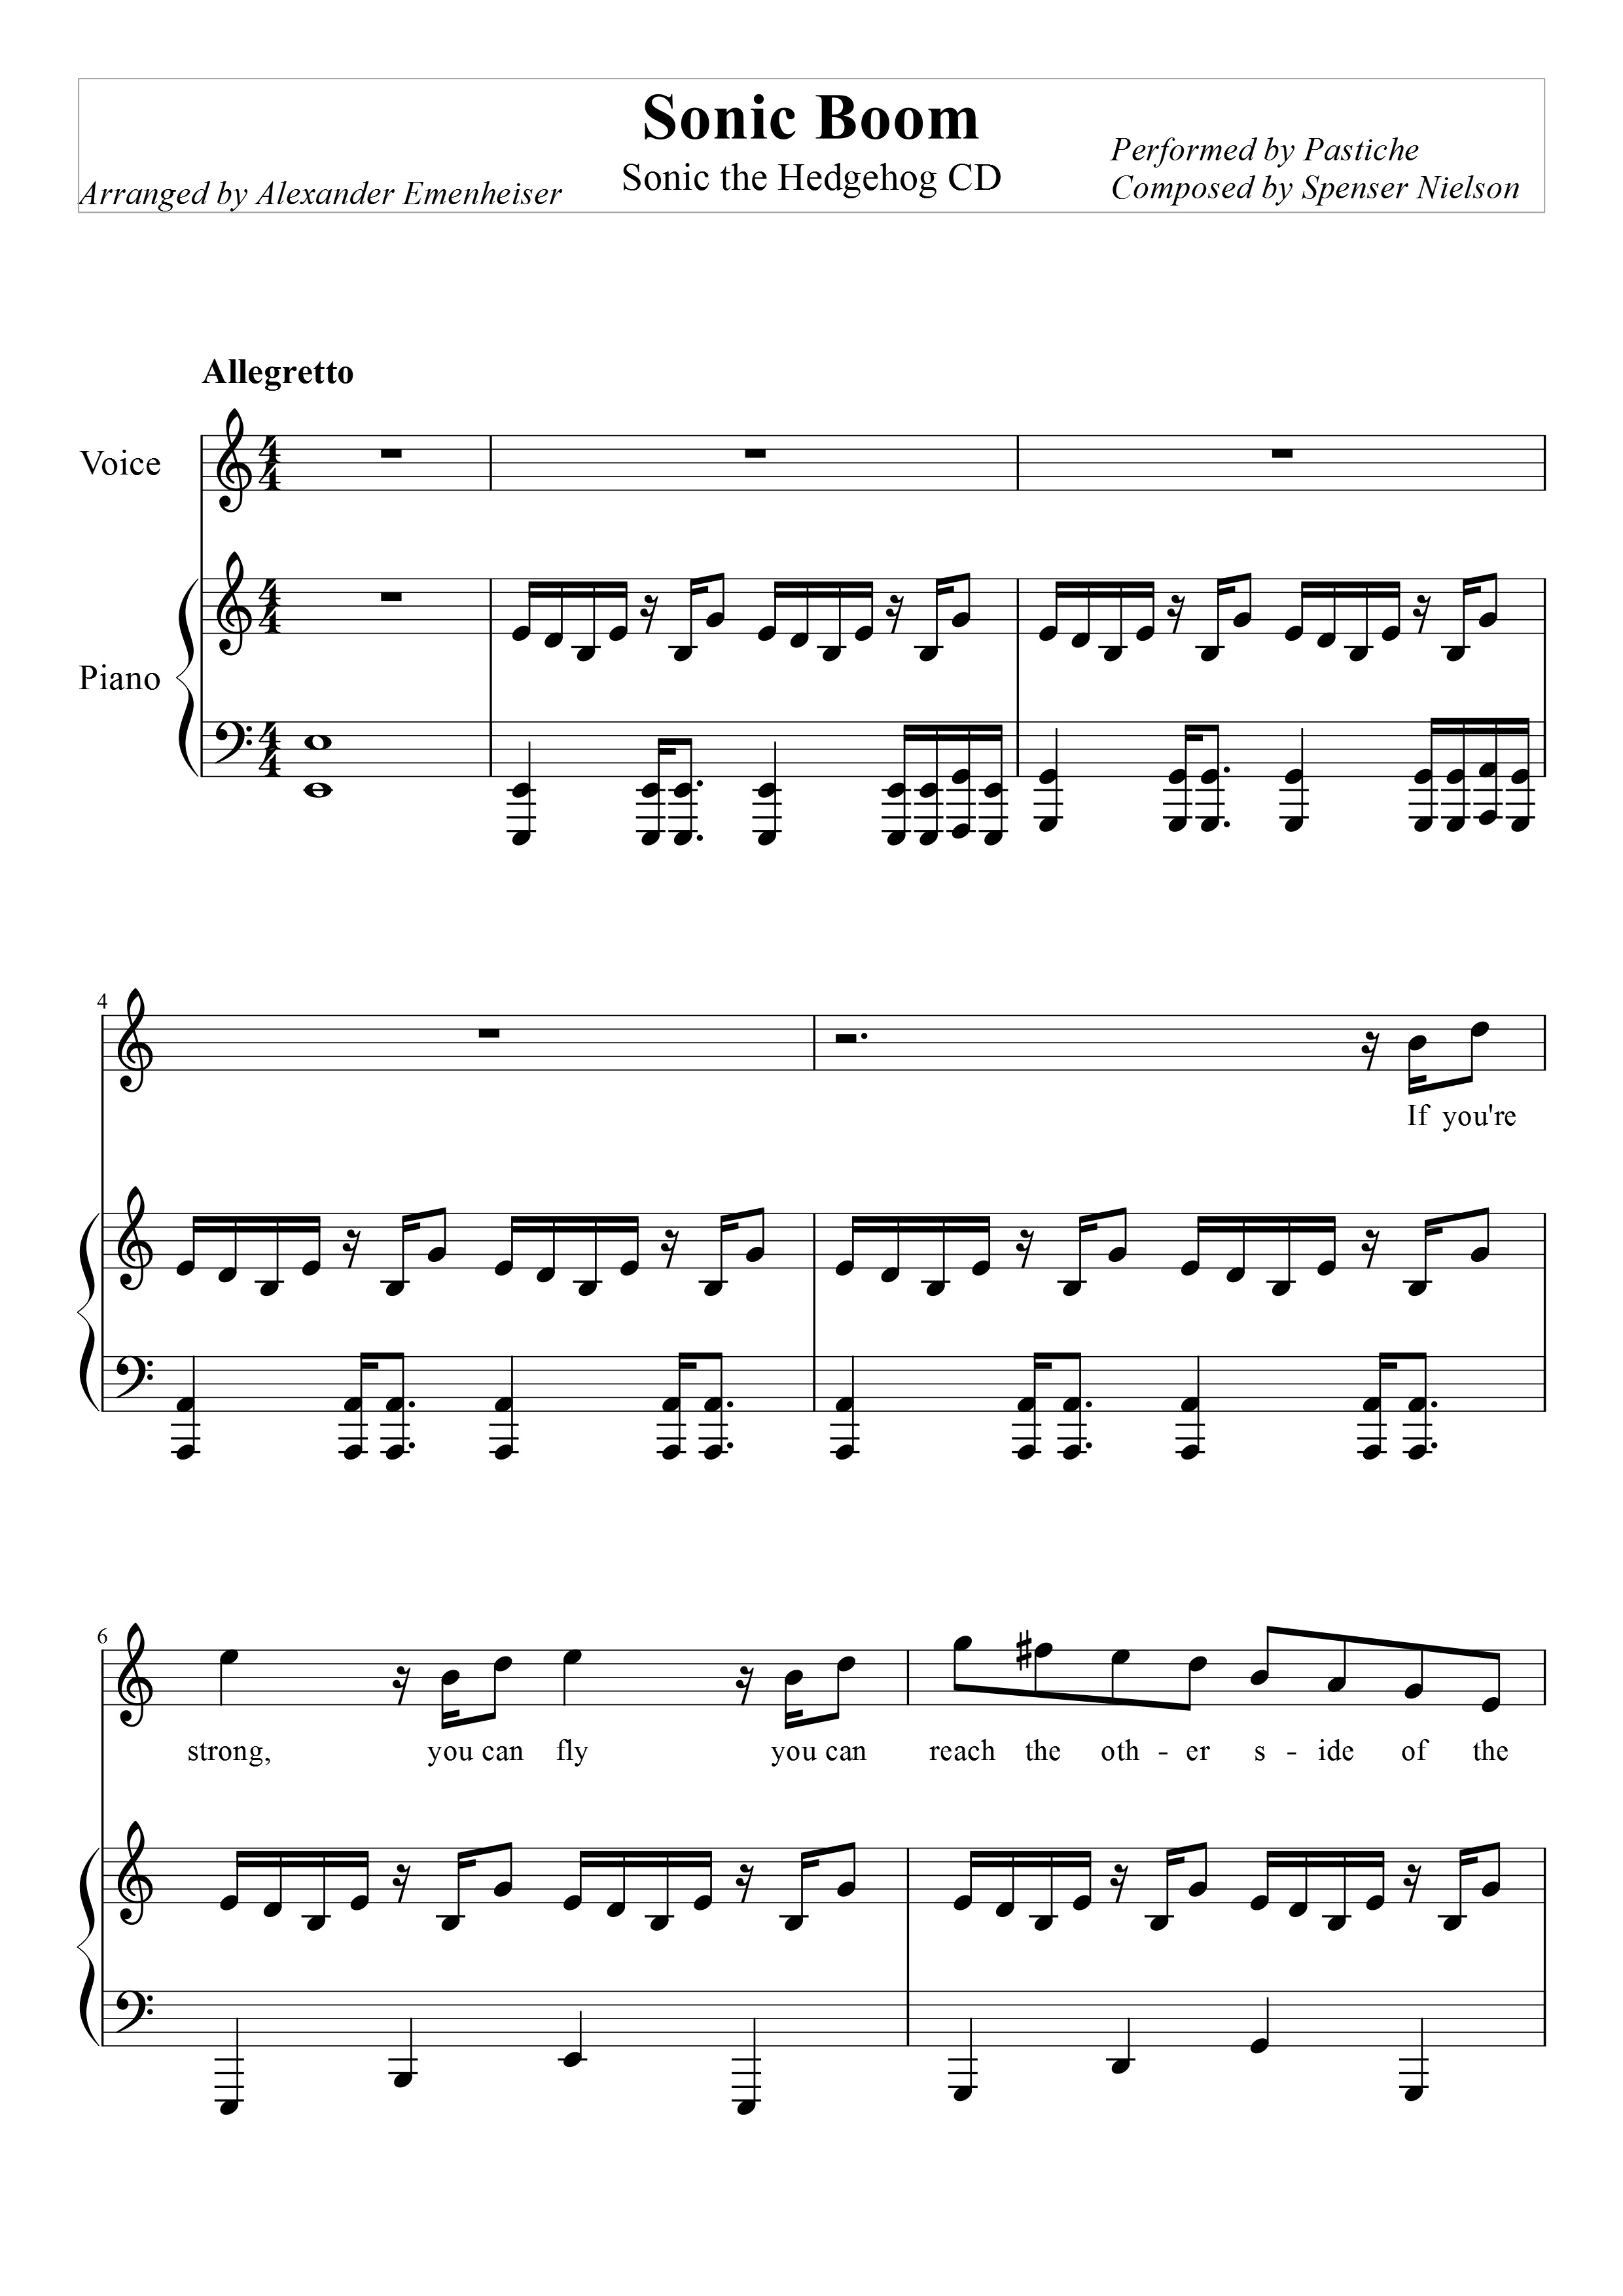 Sonic Boom Sheet Music Page 1 by ADE501 on DeviantArt